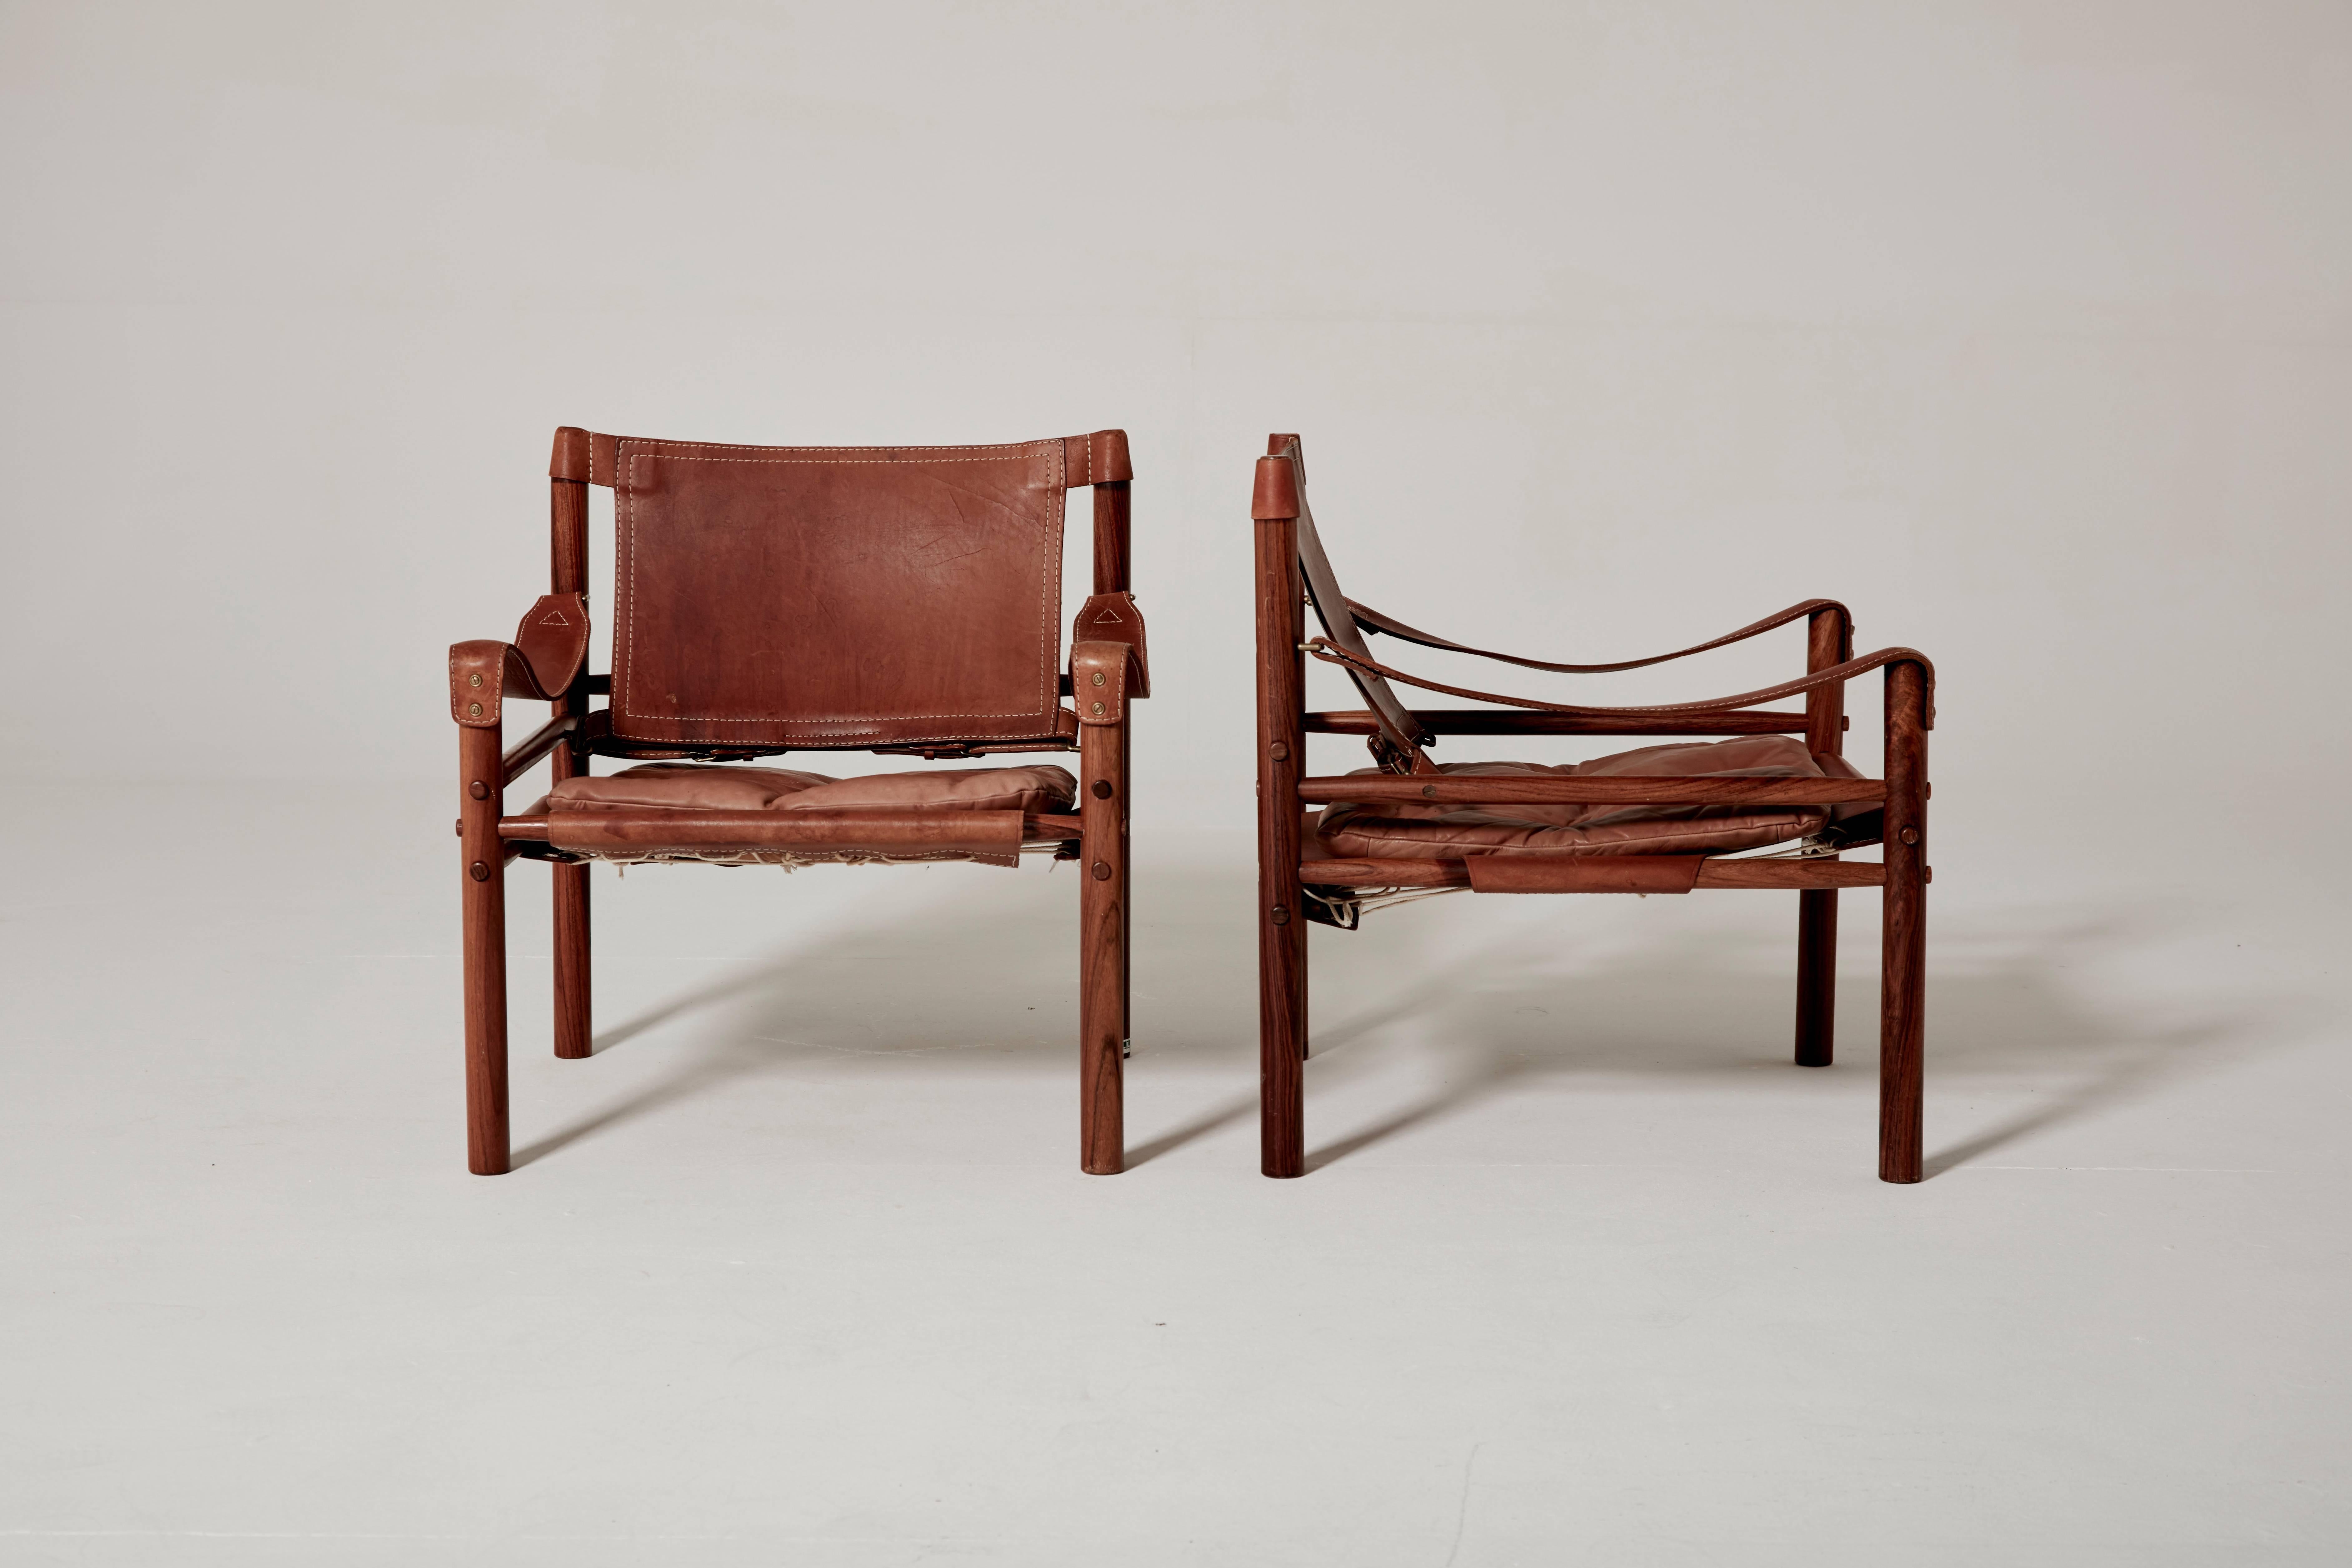 An exceptional original pair of Arne Norell safari sirocco chairs in rosewood and patinated brown leather, 1960s, Sweden. Made by Norell Möbel, AB, Sweden.